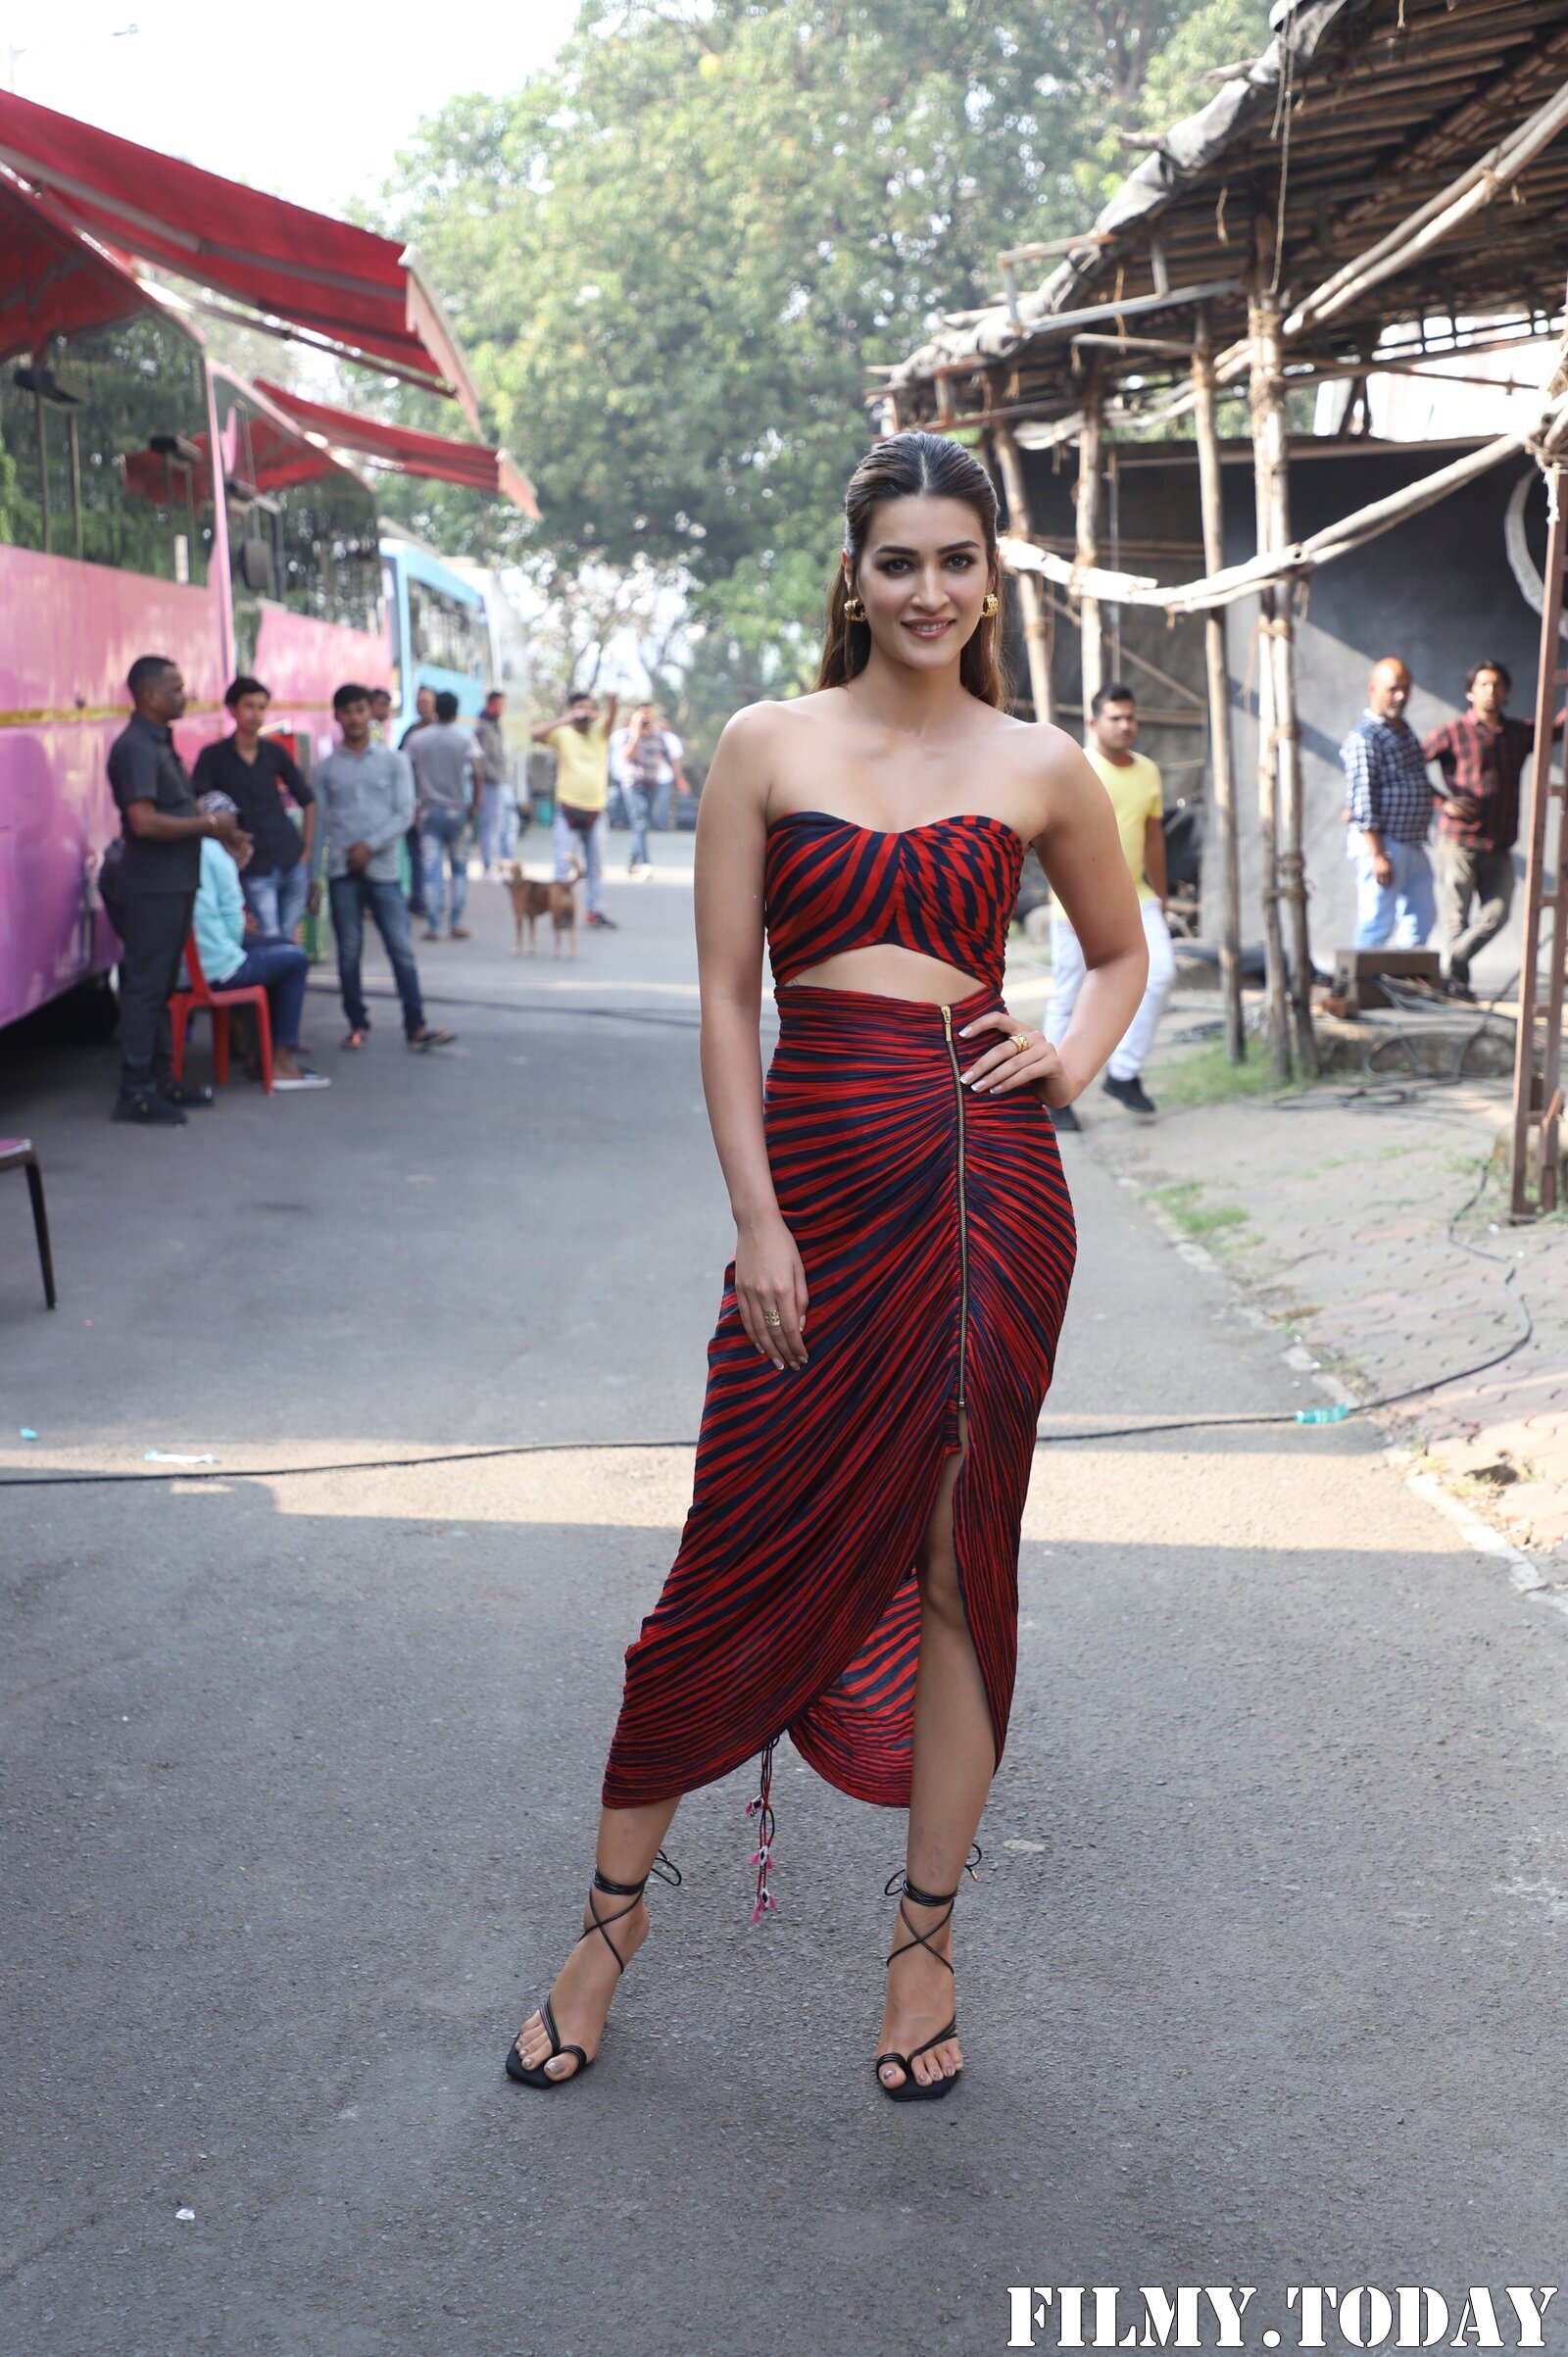 Kriti Sanon - Photos: Celebs Spotted At The Kapil Sharma Show | Picture 1909168